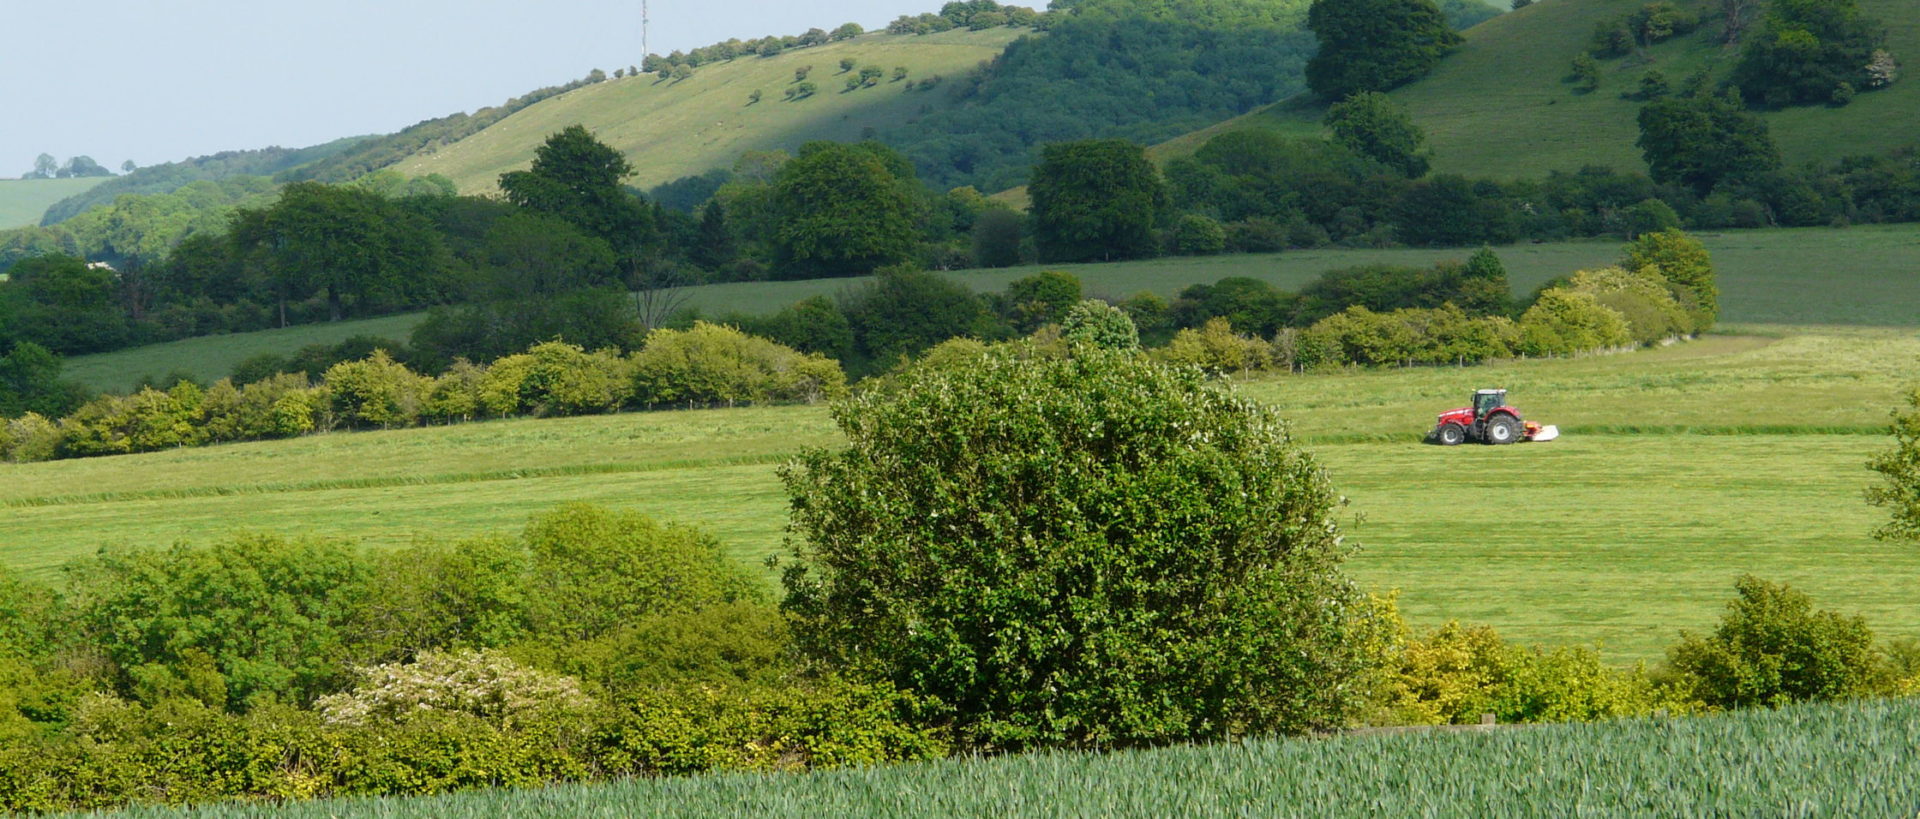 Farming, Mowing haylage towards Ladle Hill & Watership Down, Lord Carnarvon 2011